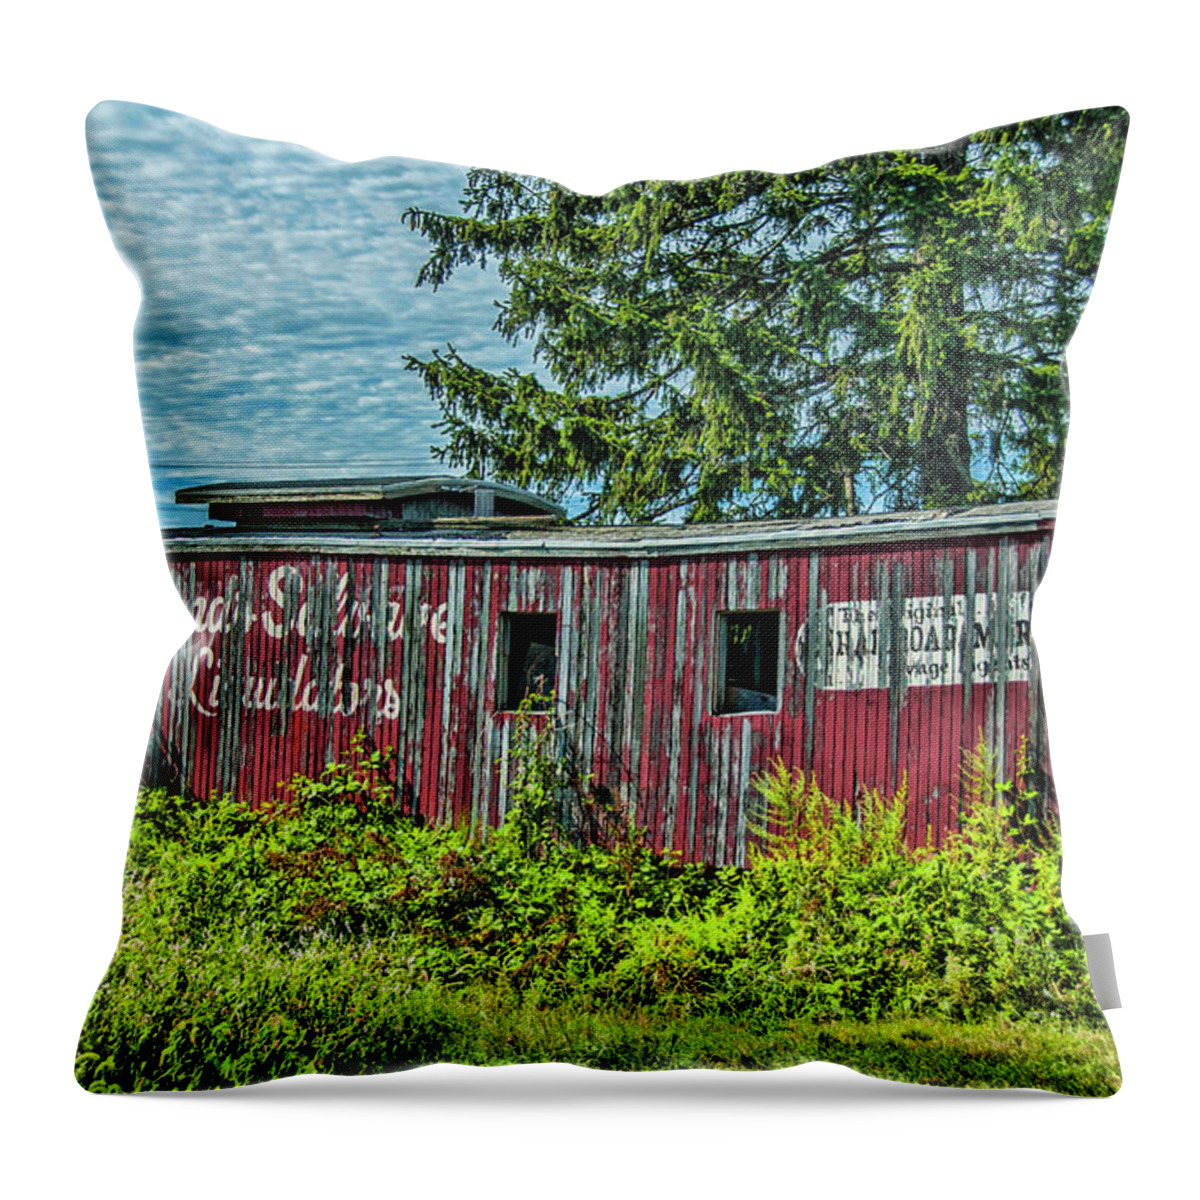 Caboose Throw Pillow featuring the photograph Old Red Caboose by Cathy Kovarik